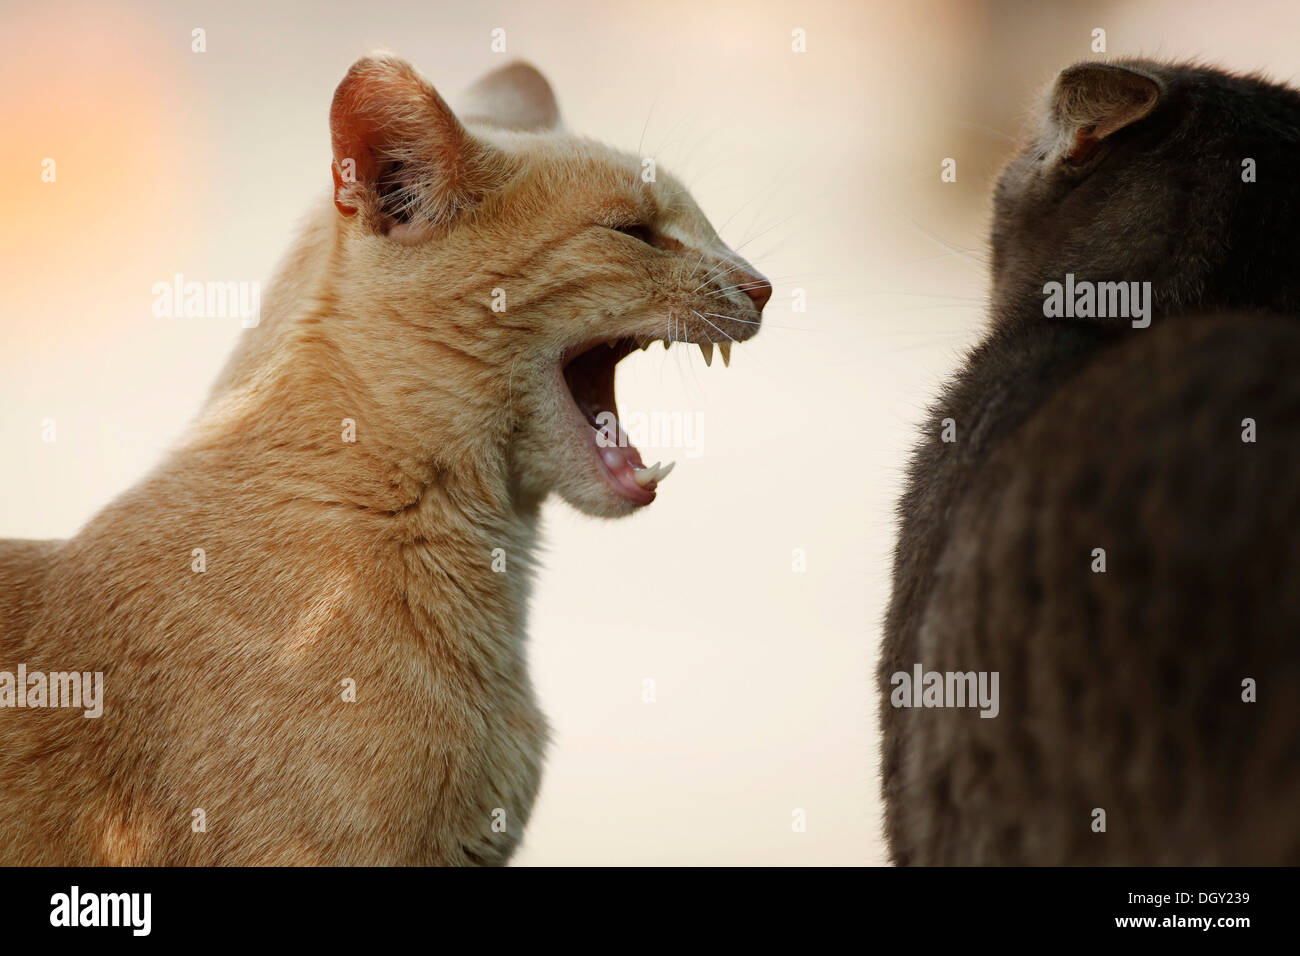 Two cats fighting, a red tabby cat hissing at a silver gray tabby cat Stock Photo